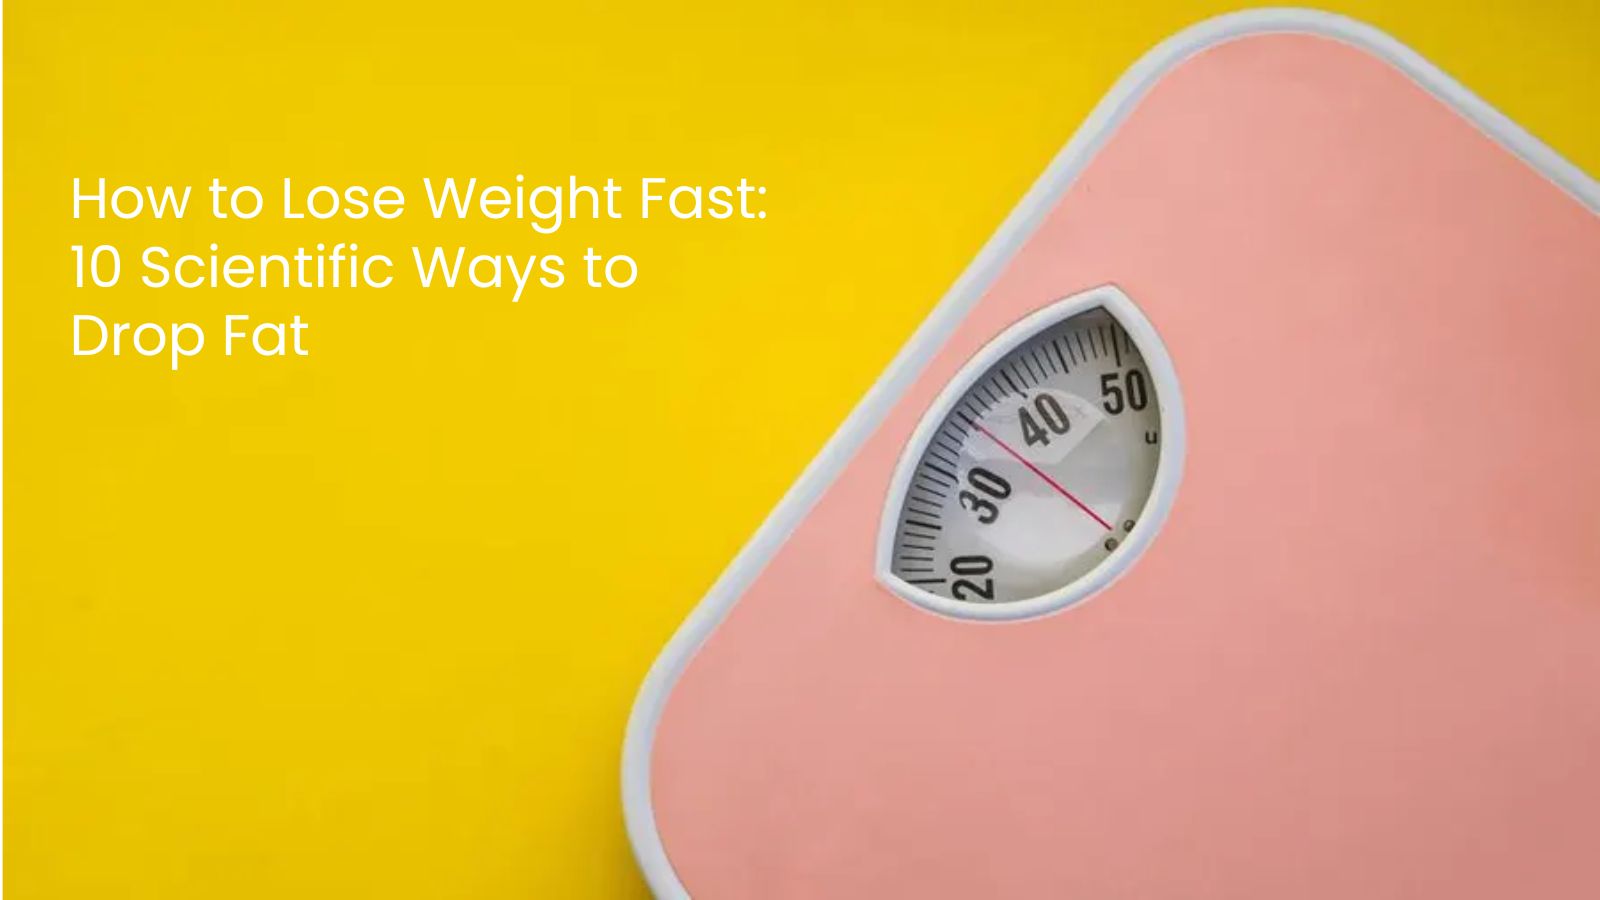 How to Lose Weight Fast: 10 Scientific Ways to Drop Fat